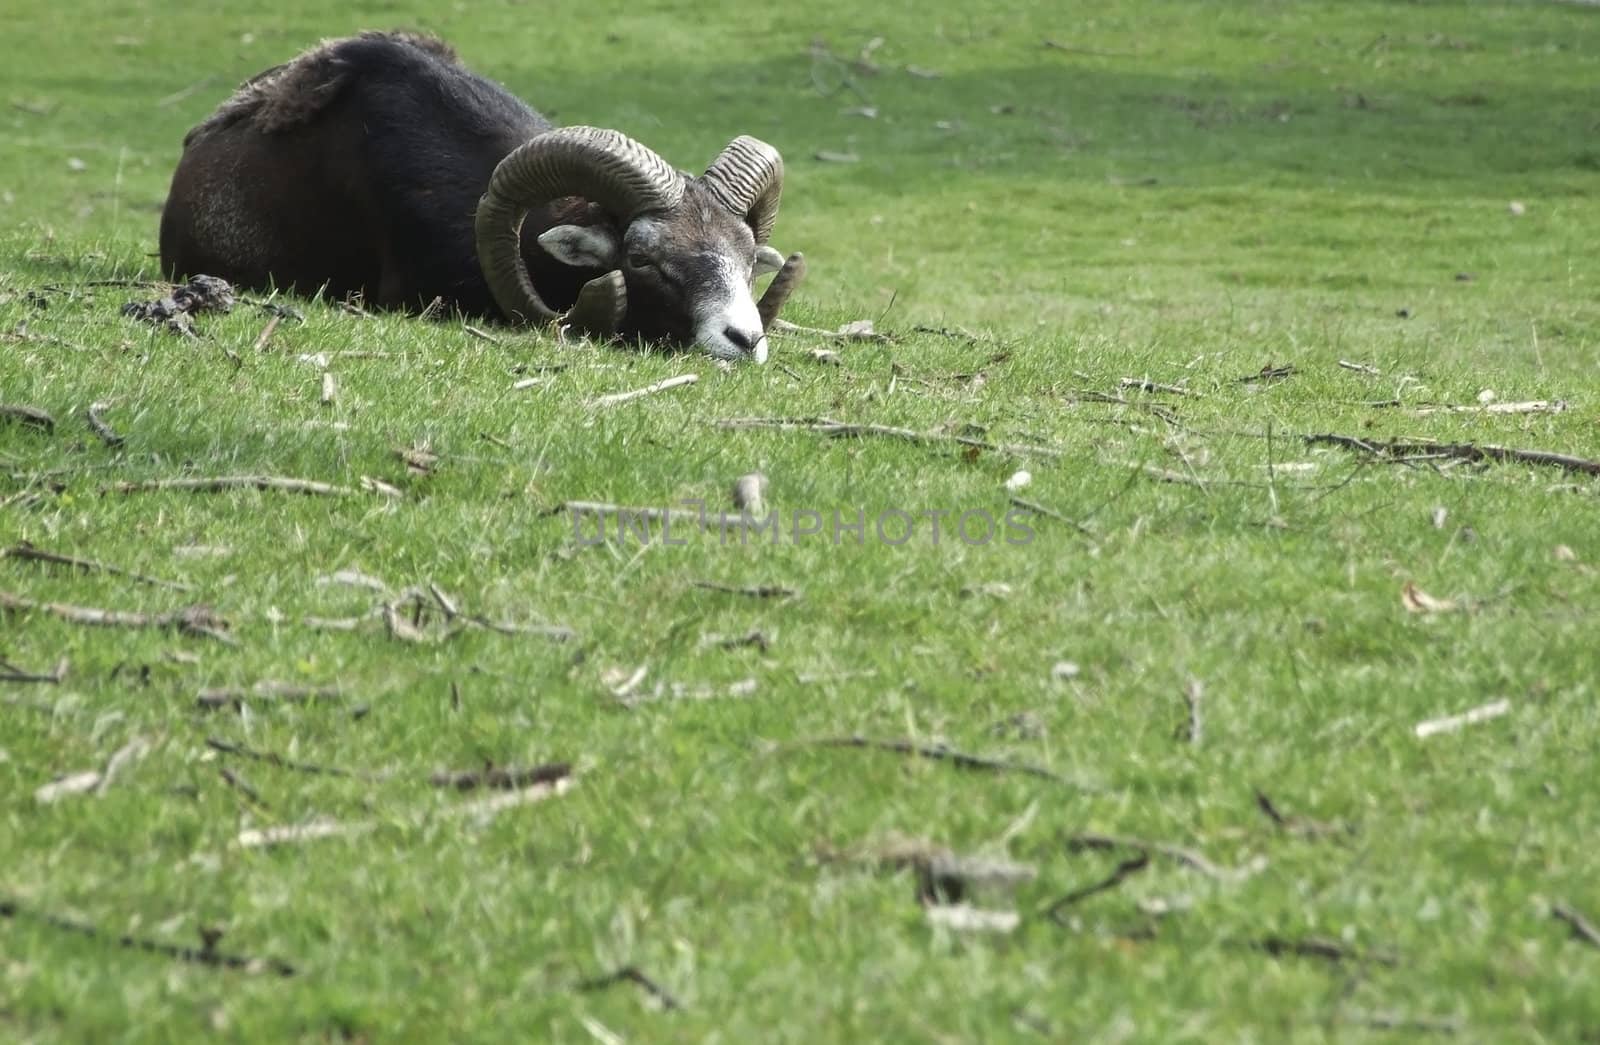 Mouflon on the grass by whiteowl